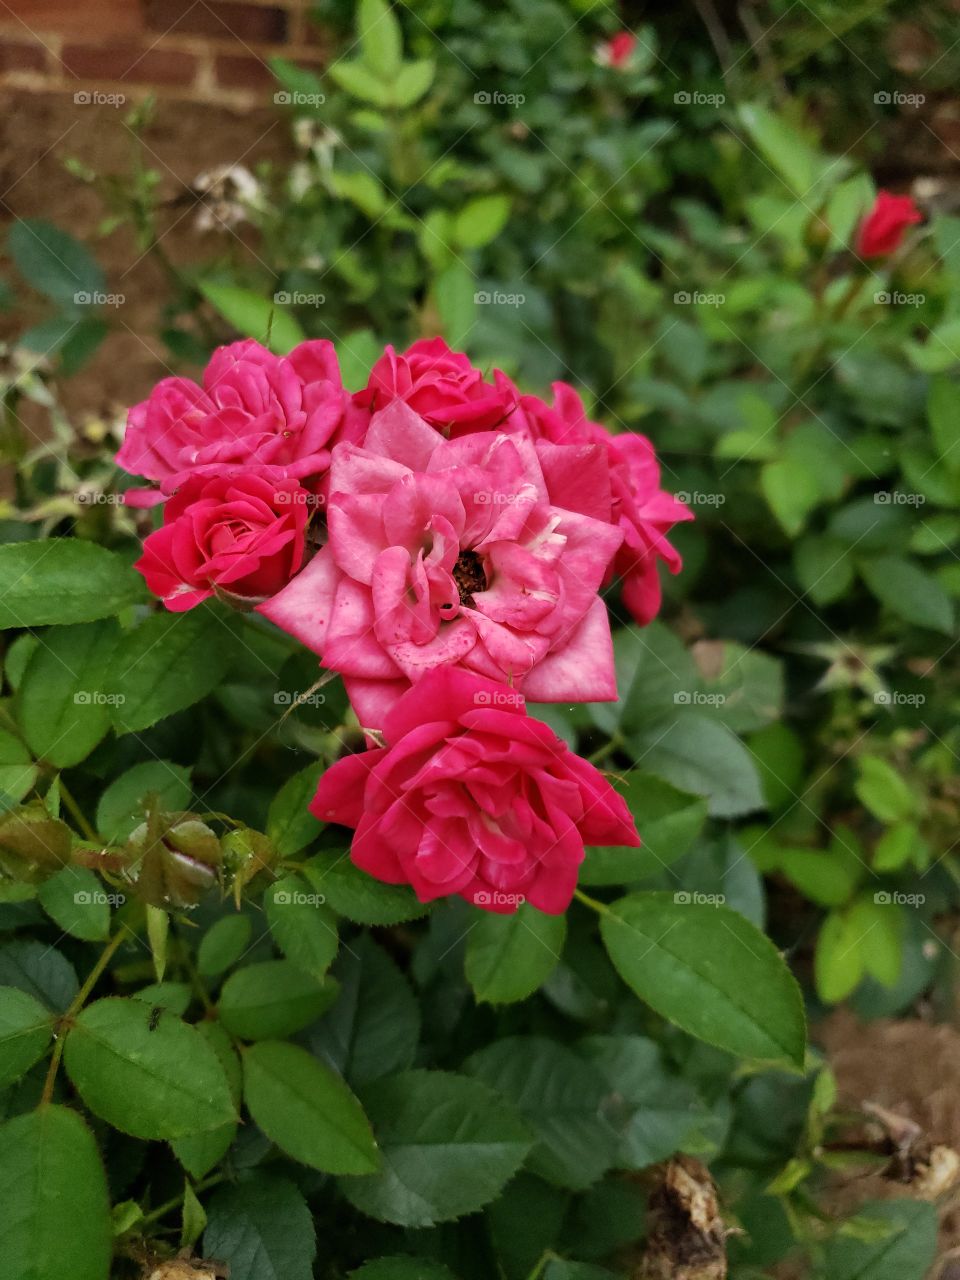 Pink Rose's in the garden.